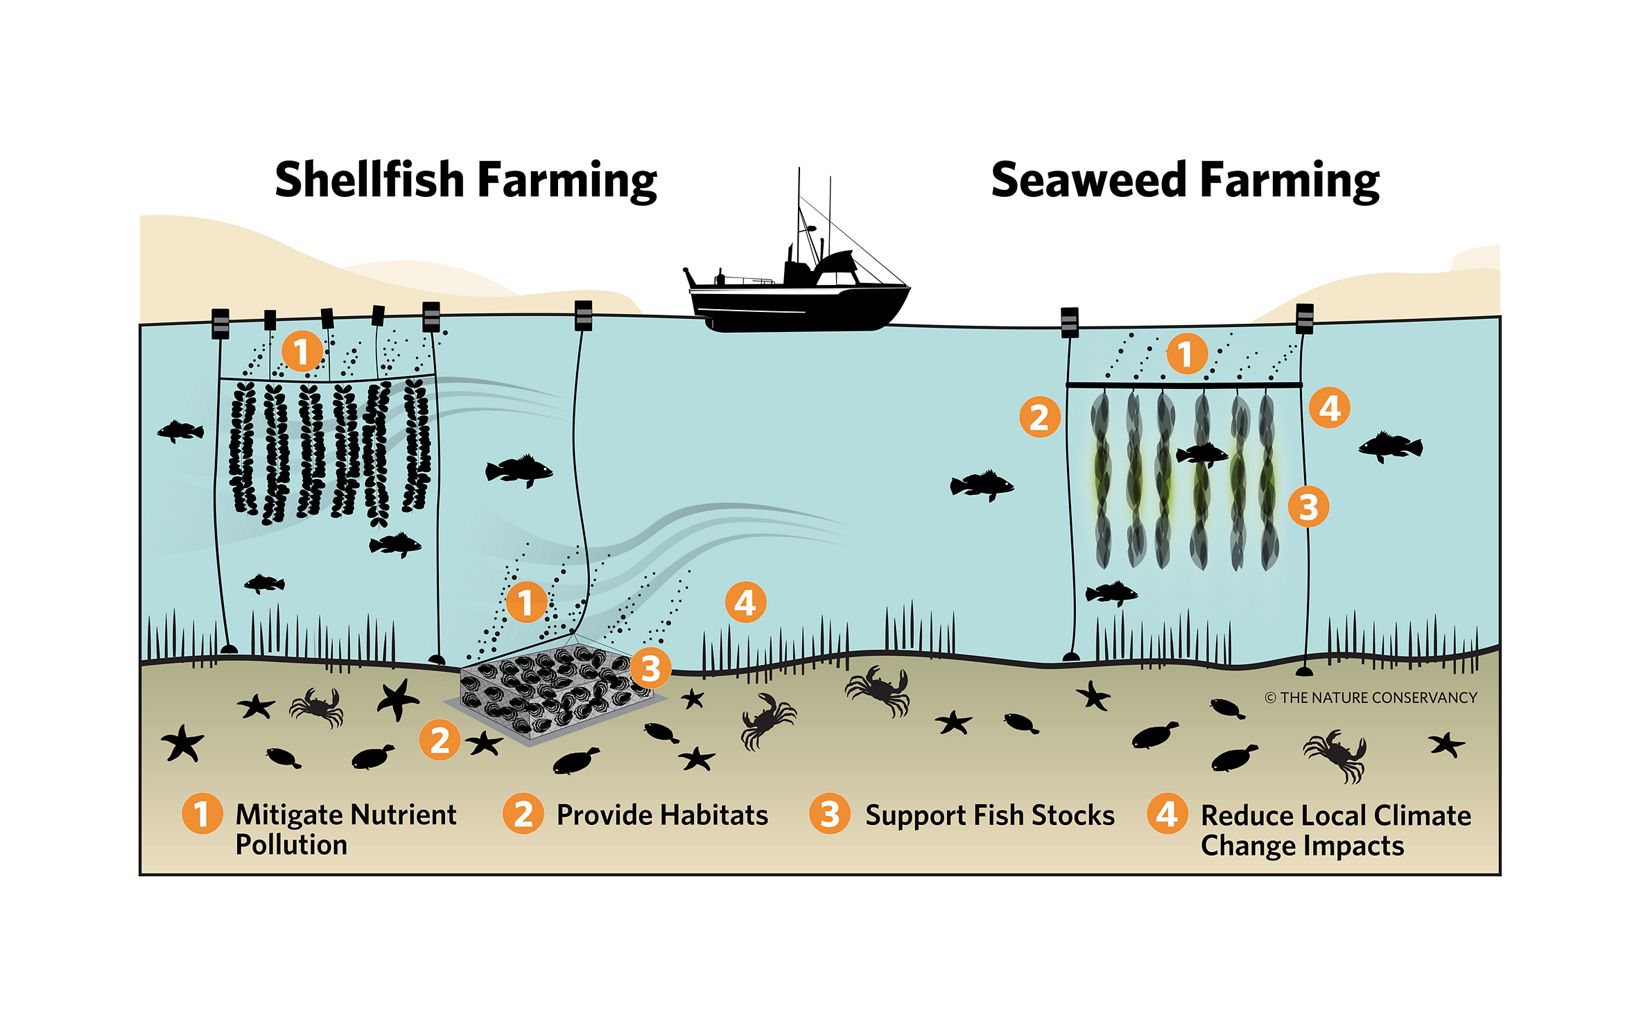 Of the three sectors chosen for deeper analysis, near-shore bivalve production and seaweed aquaculture offers the clearest environmental value proposition.